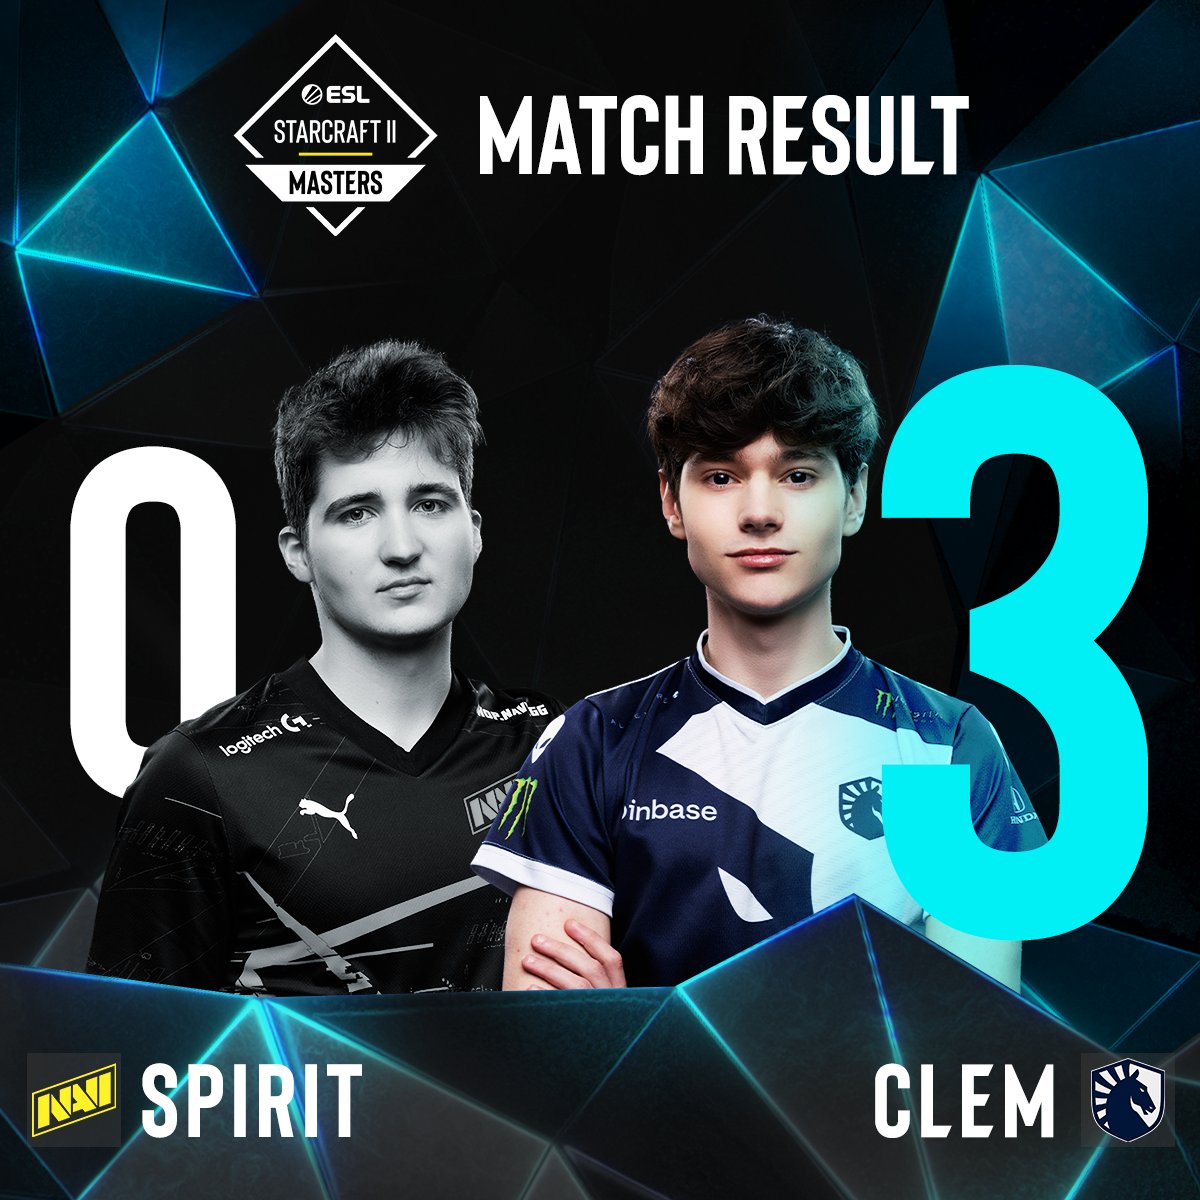 Fool me once... @Clem_sc2 gets his revenge on Spirit with a clean sweep and moves on to the grand final of Europe, where MaxPax awaits! MaxPax got to the finals of Summer: Europe, and lost to Serral. Clem got to the finals of Winter: Europe, and lost to Serral. With the Finnish…